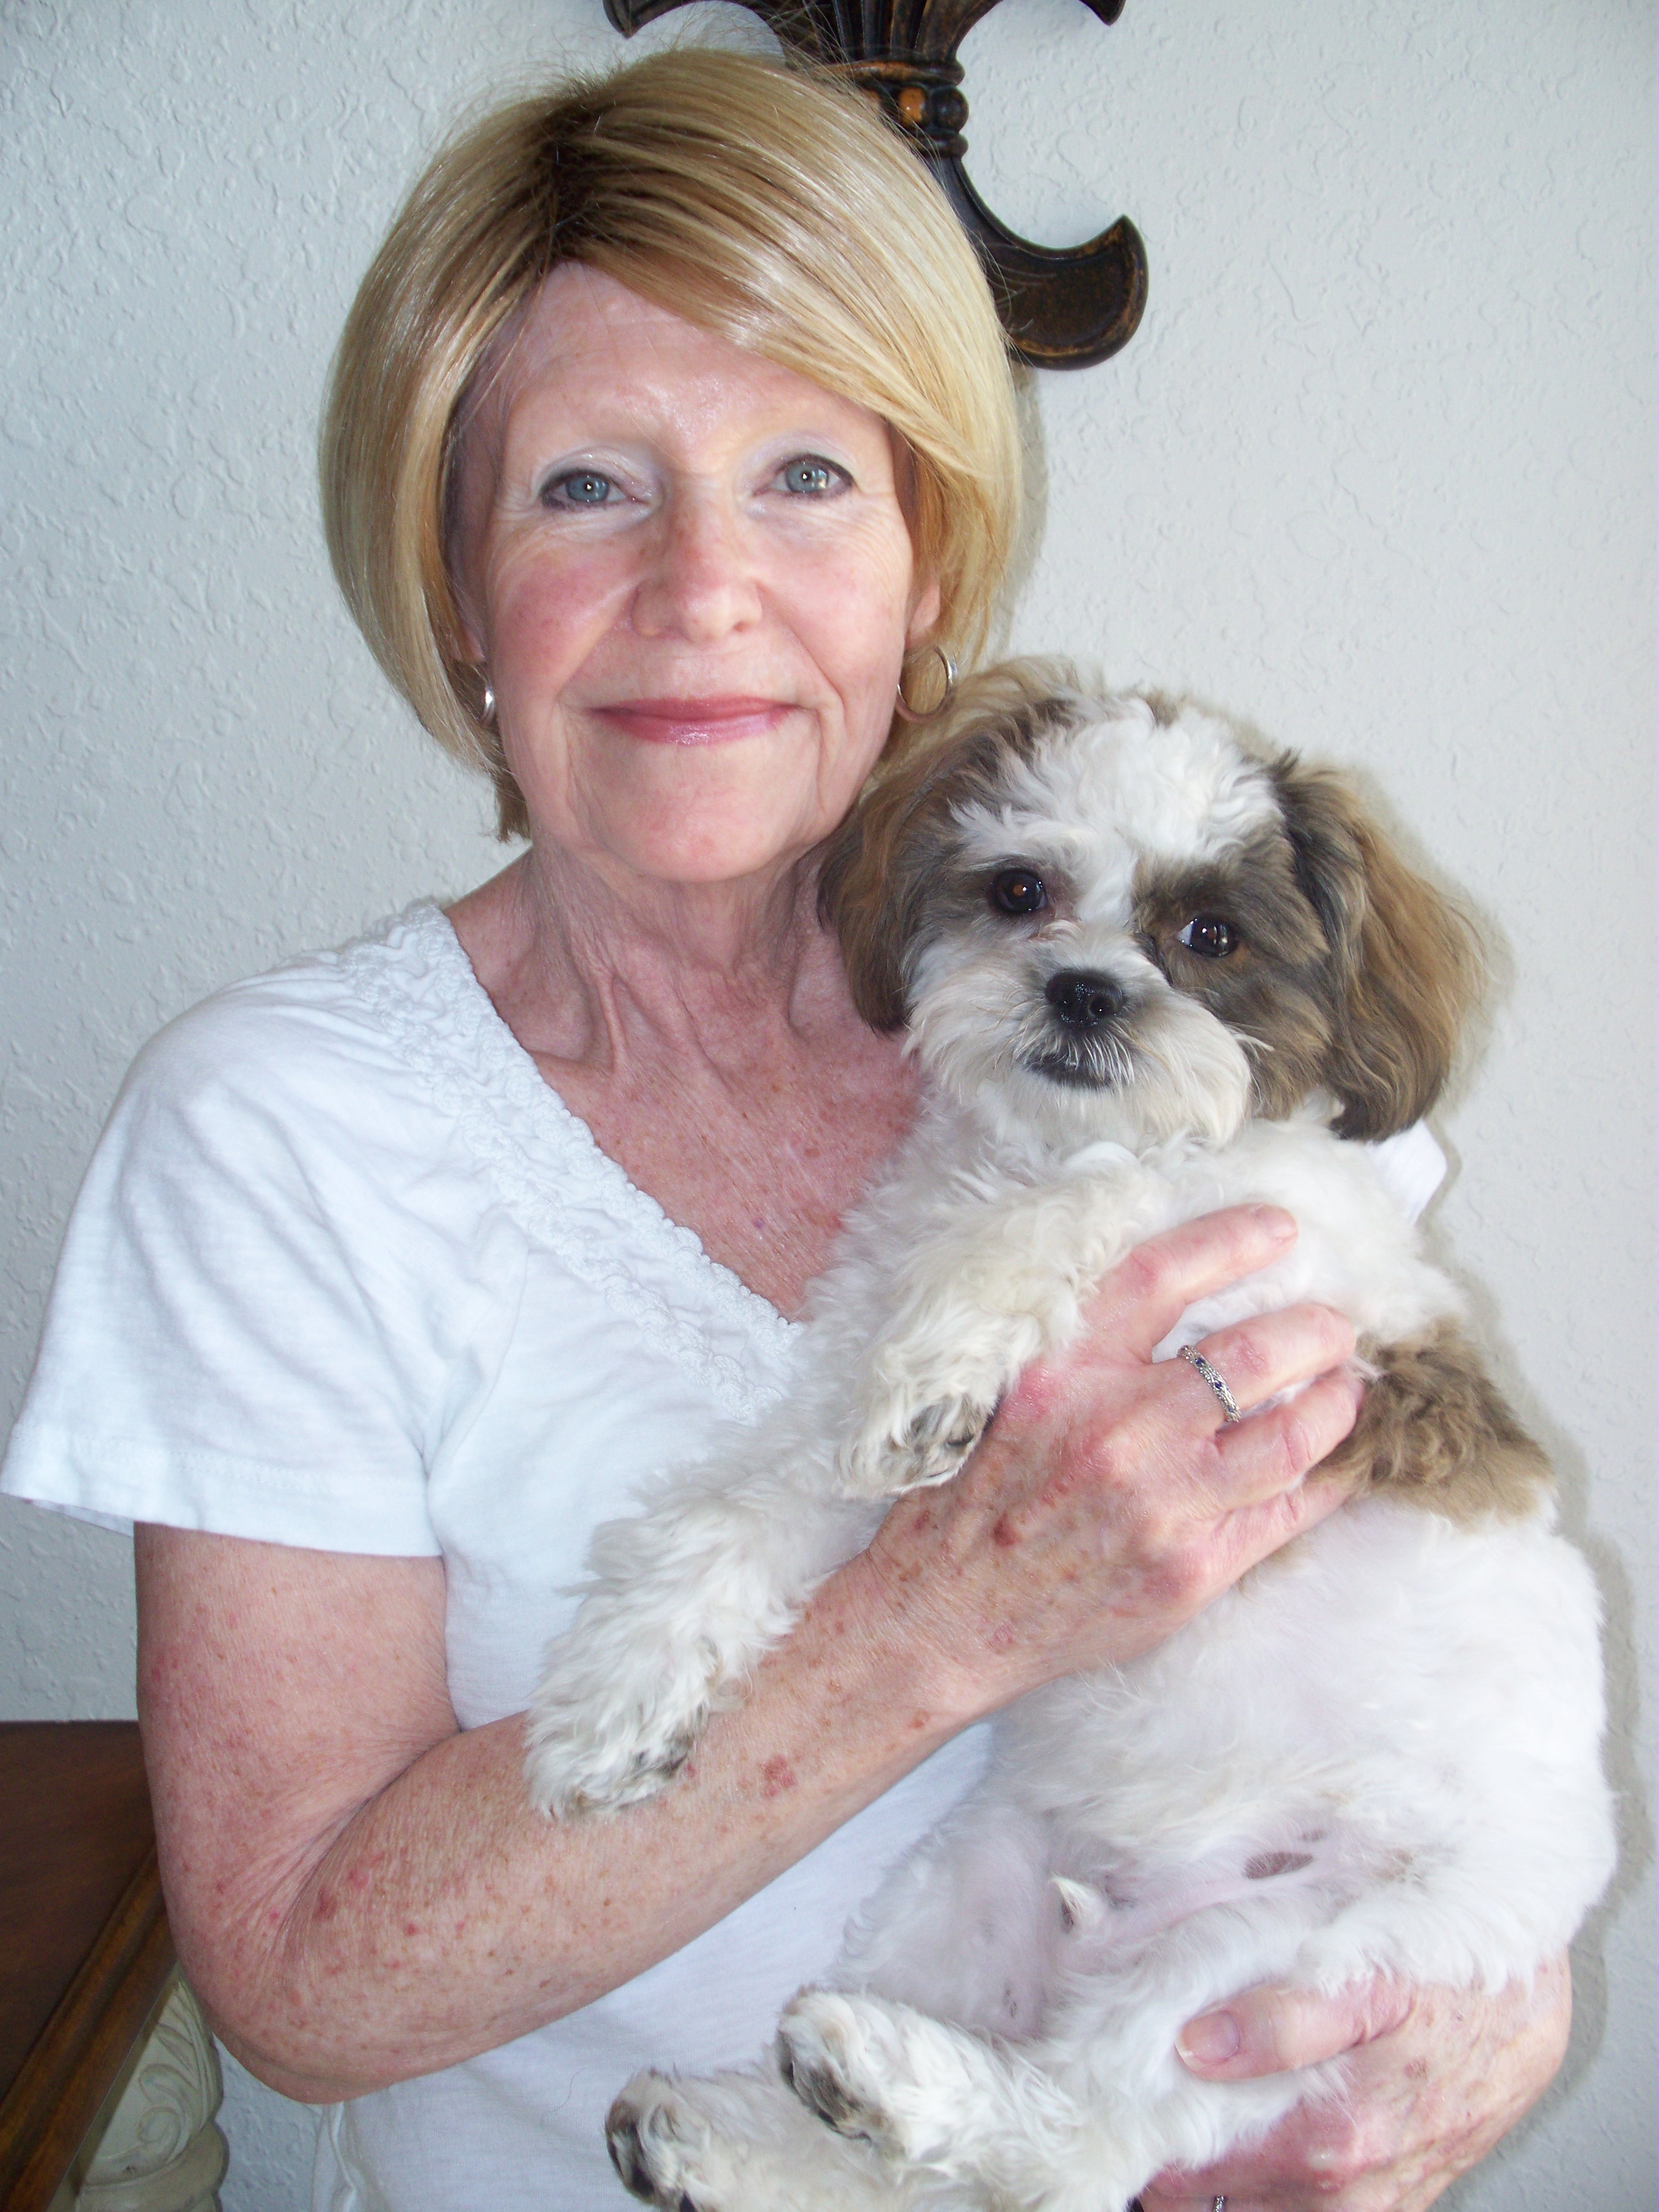 Sharon and her Ollie. He was with us in the hospice at the end. She loved the little guy. He brought her great joy.